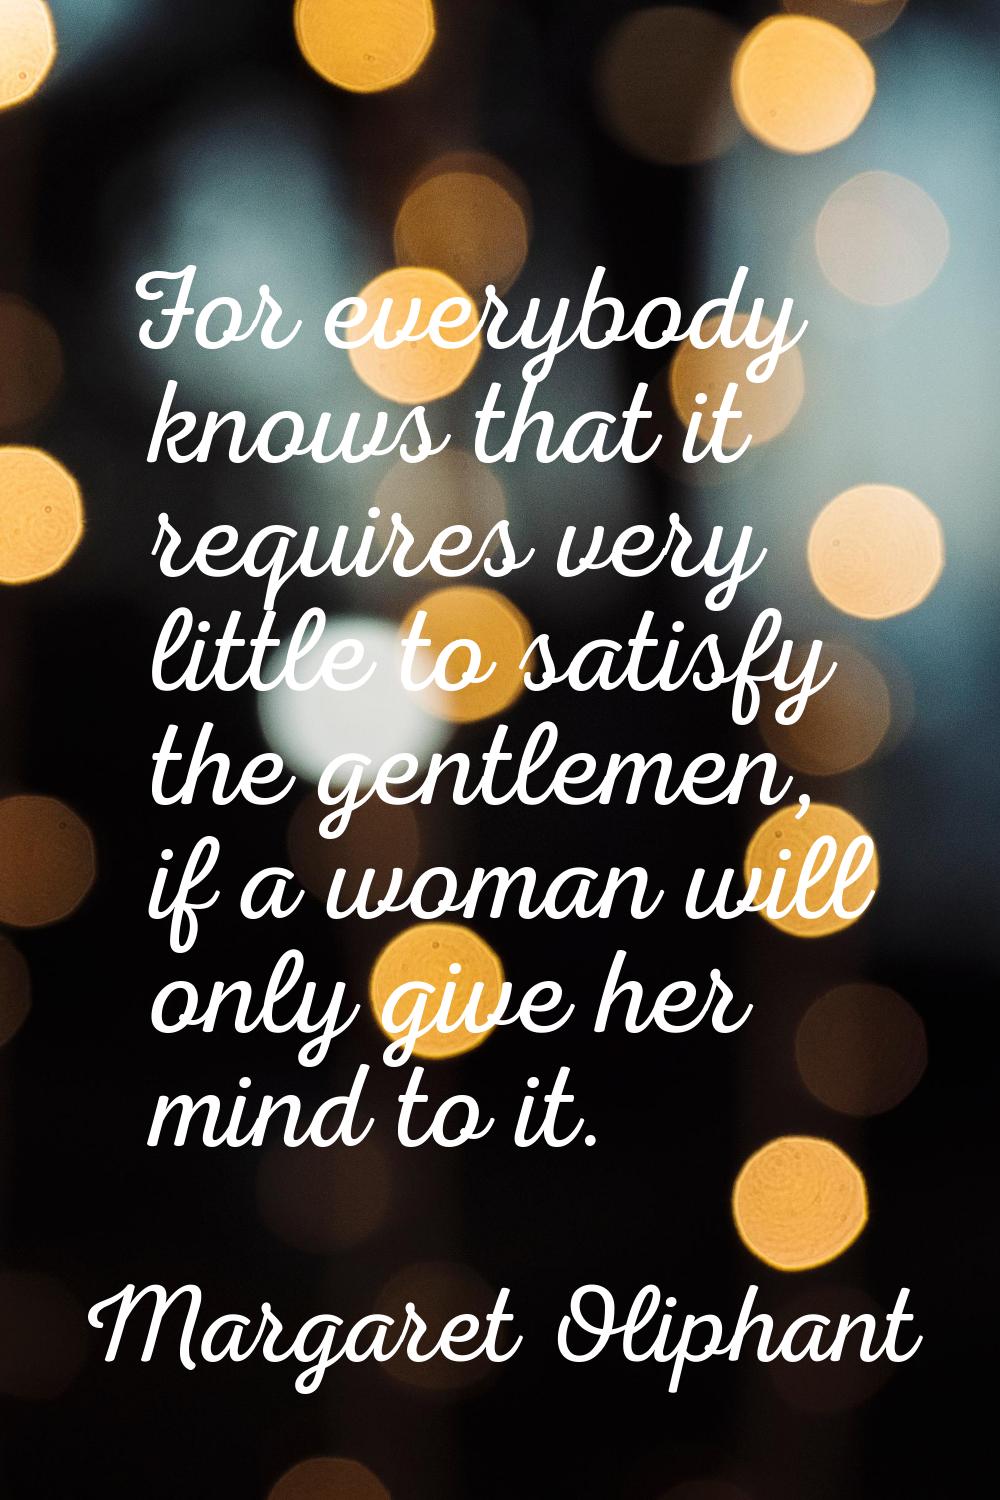 For everybody knows that it requires very little to satisfy the gentlemen, if a woman will only giv